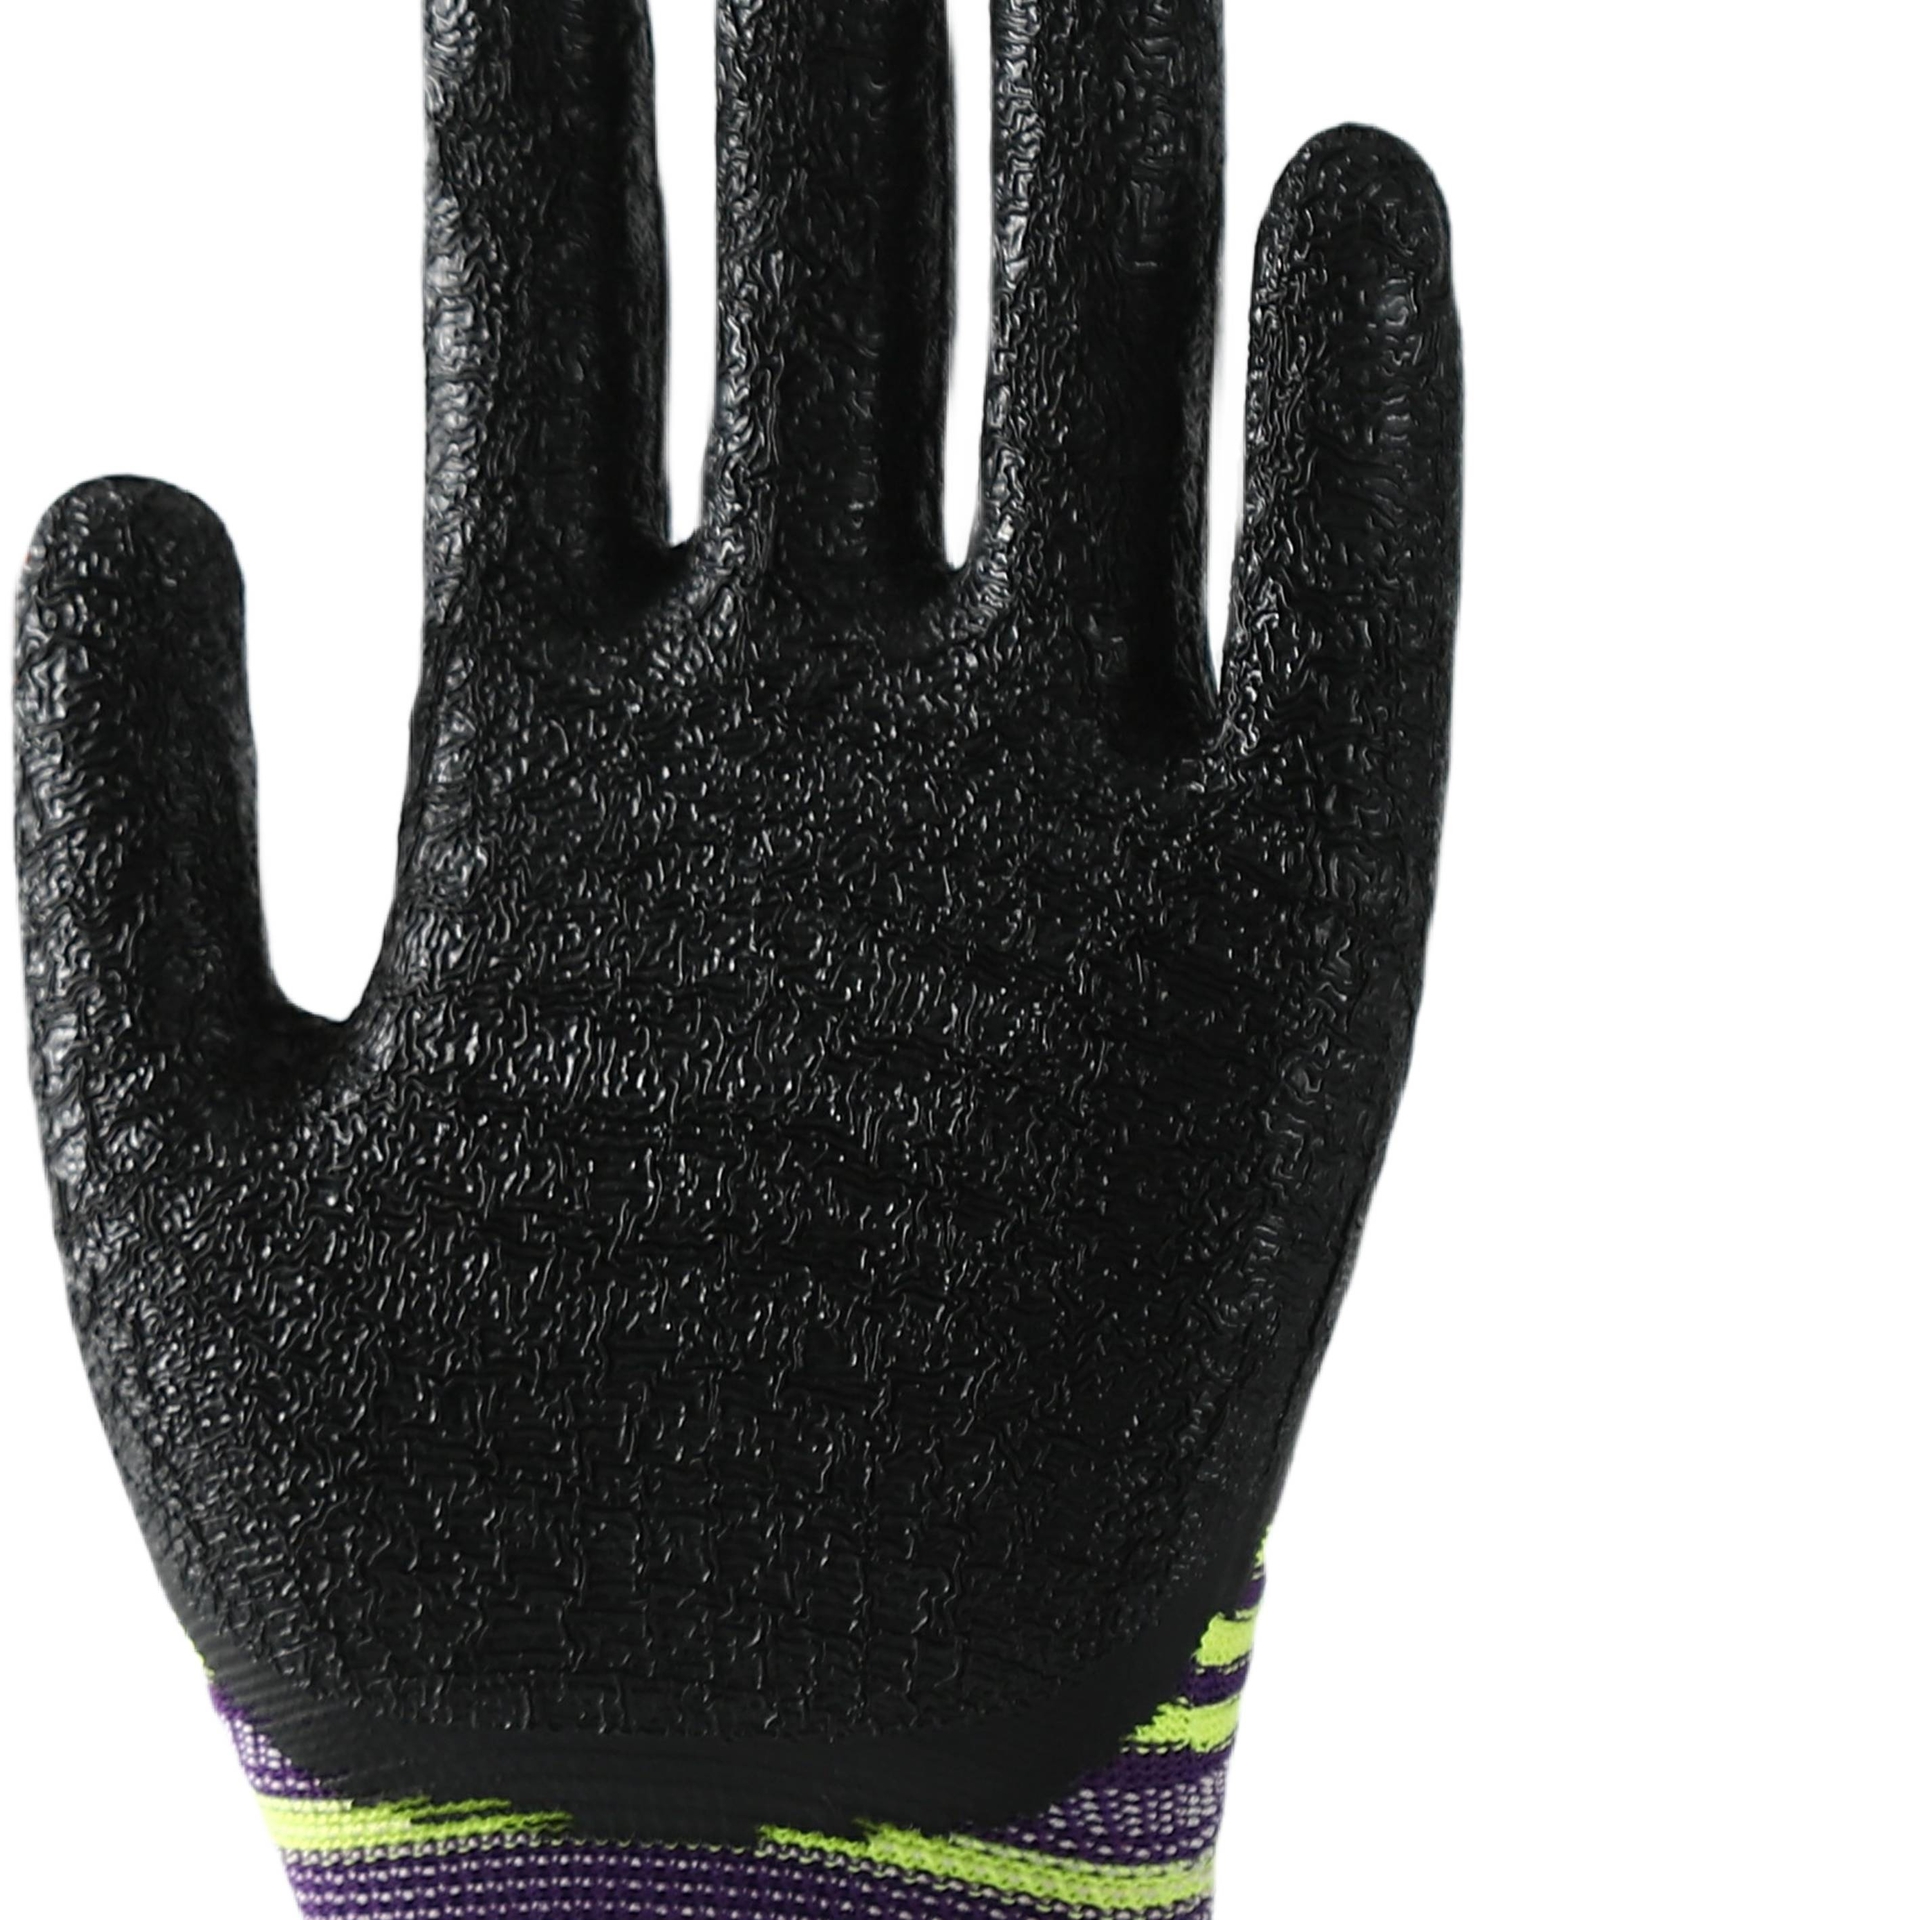                 Pattern polyester with black crinkle latex coated gloves            